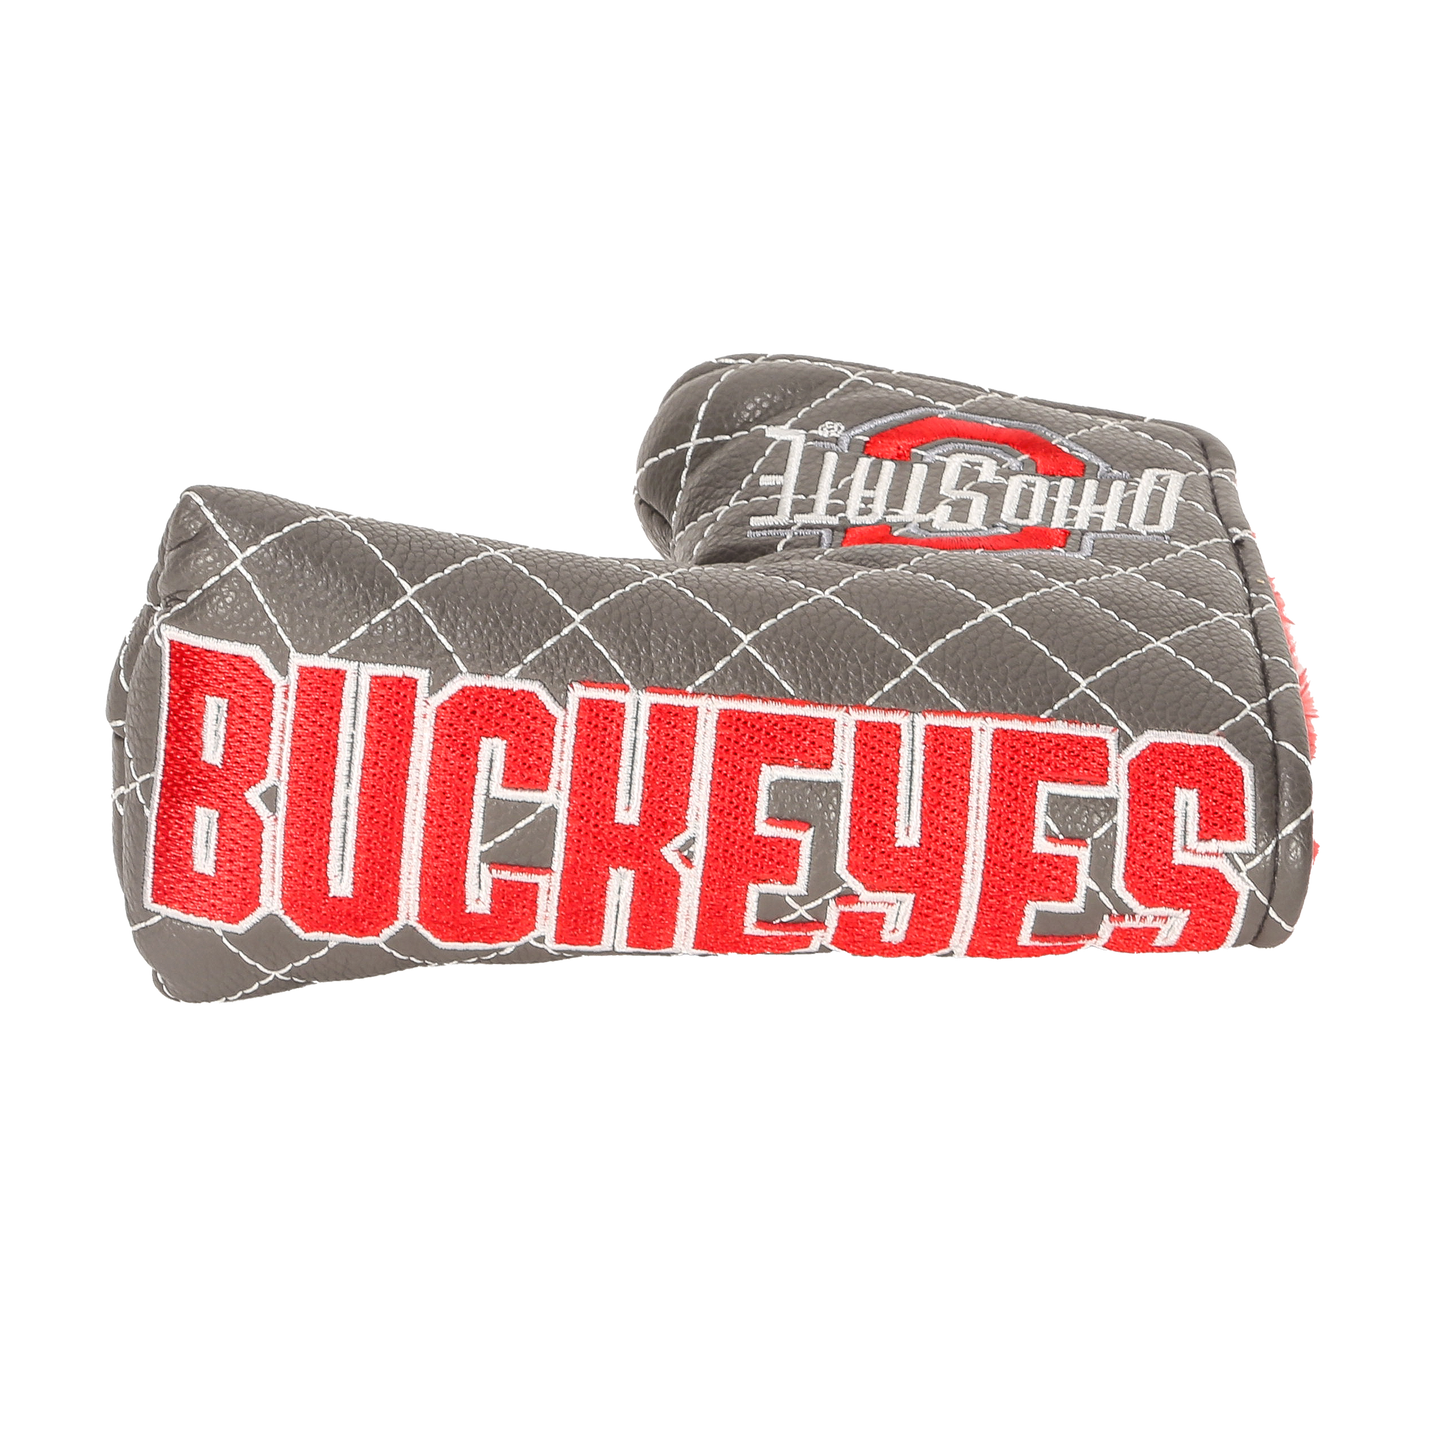 Ohio State "Buckeyes" Blade Putter Cover